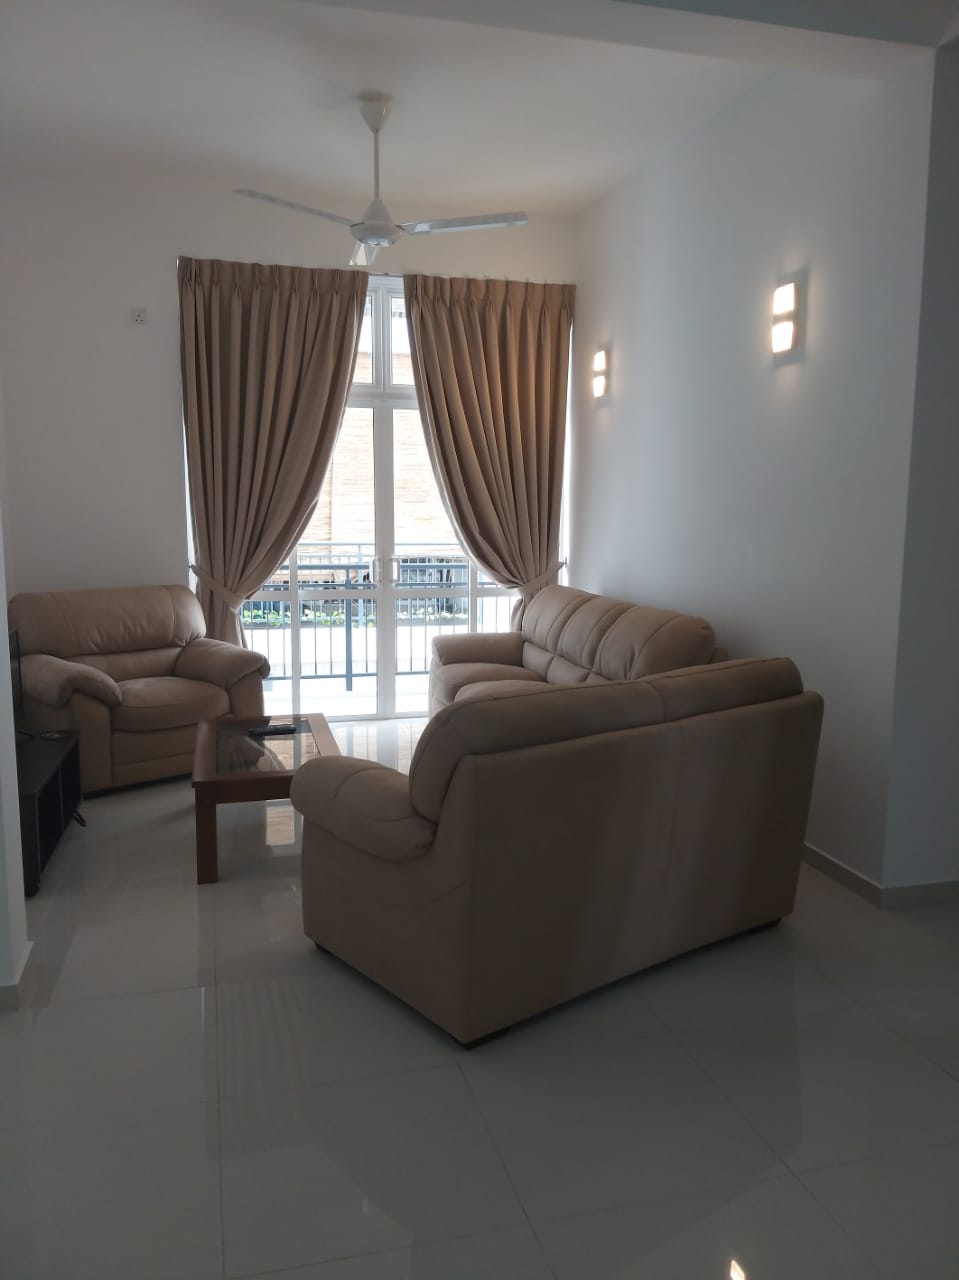 Apartment For Rent In Kotte